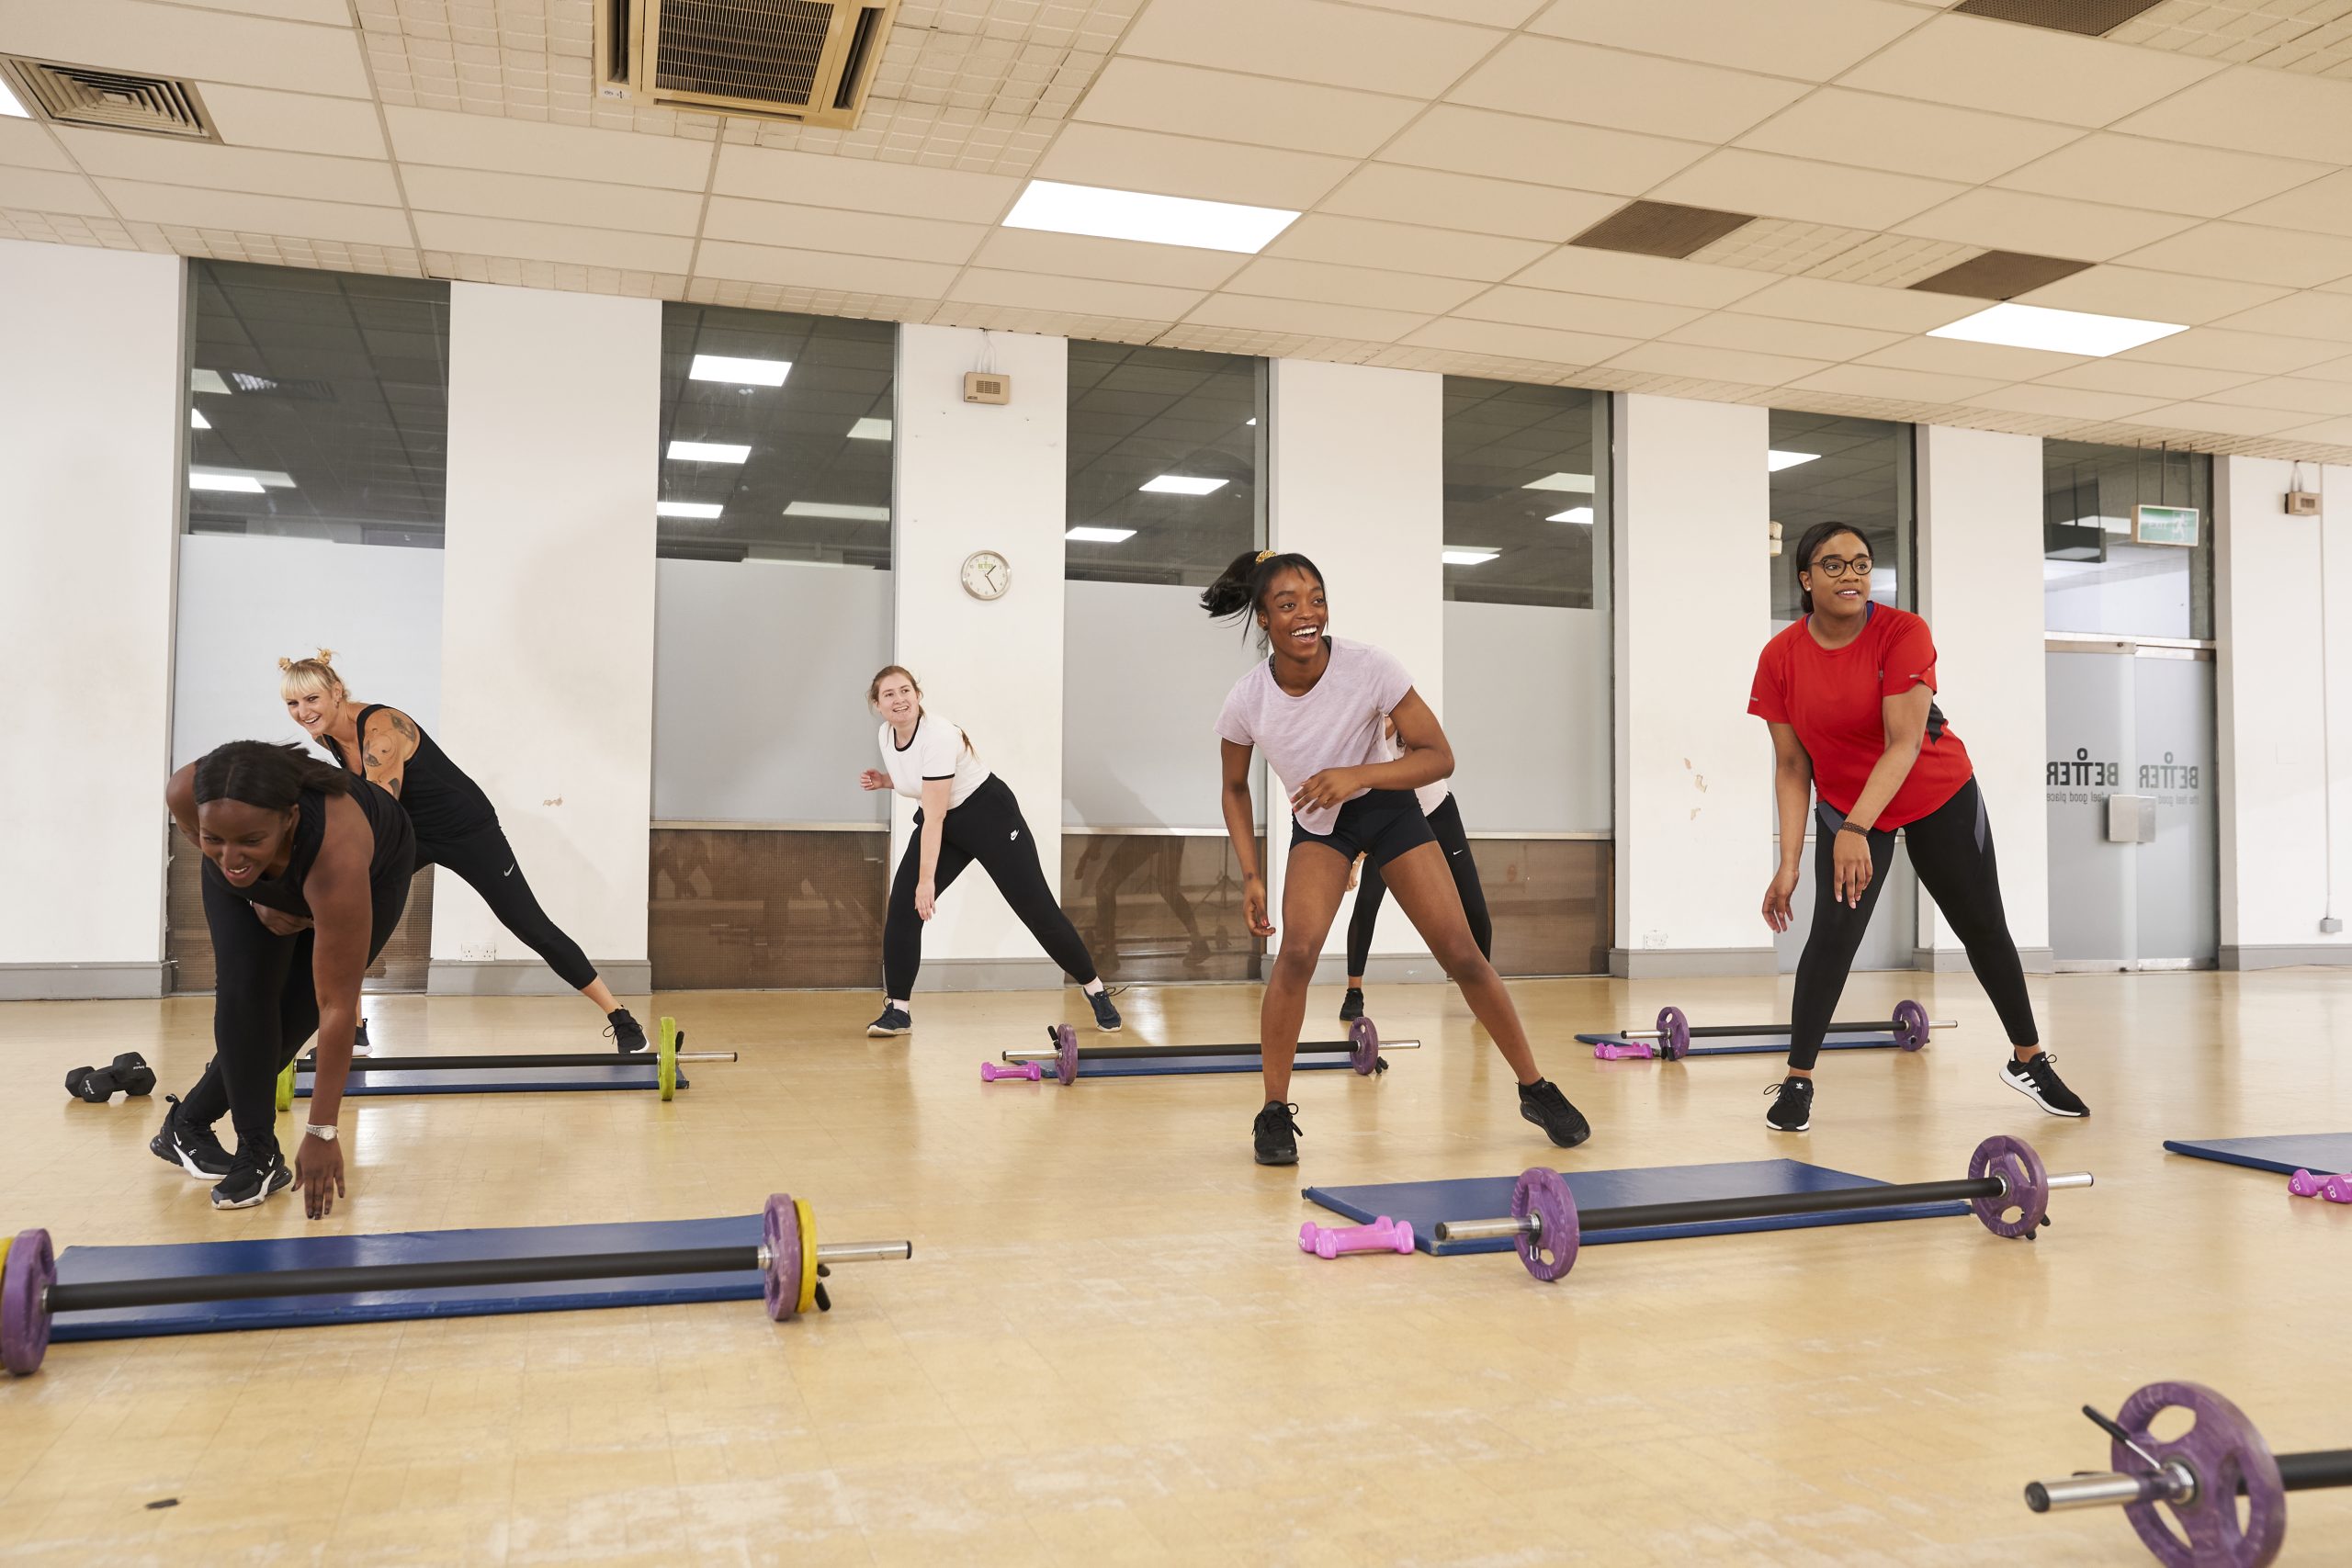 A group of women exercising in a leisure centre hall